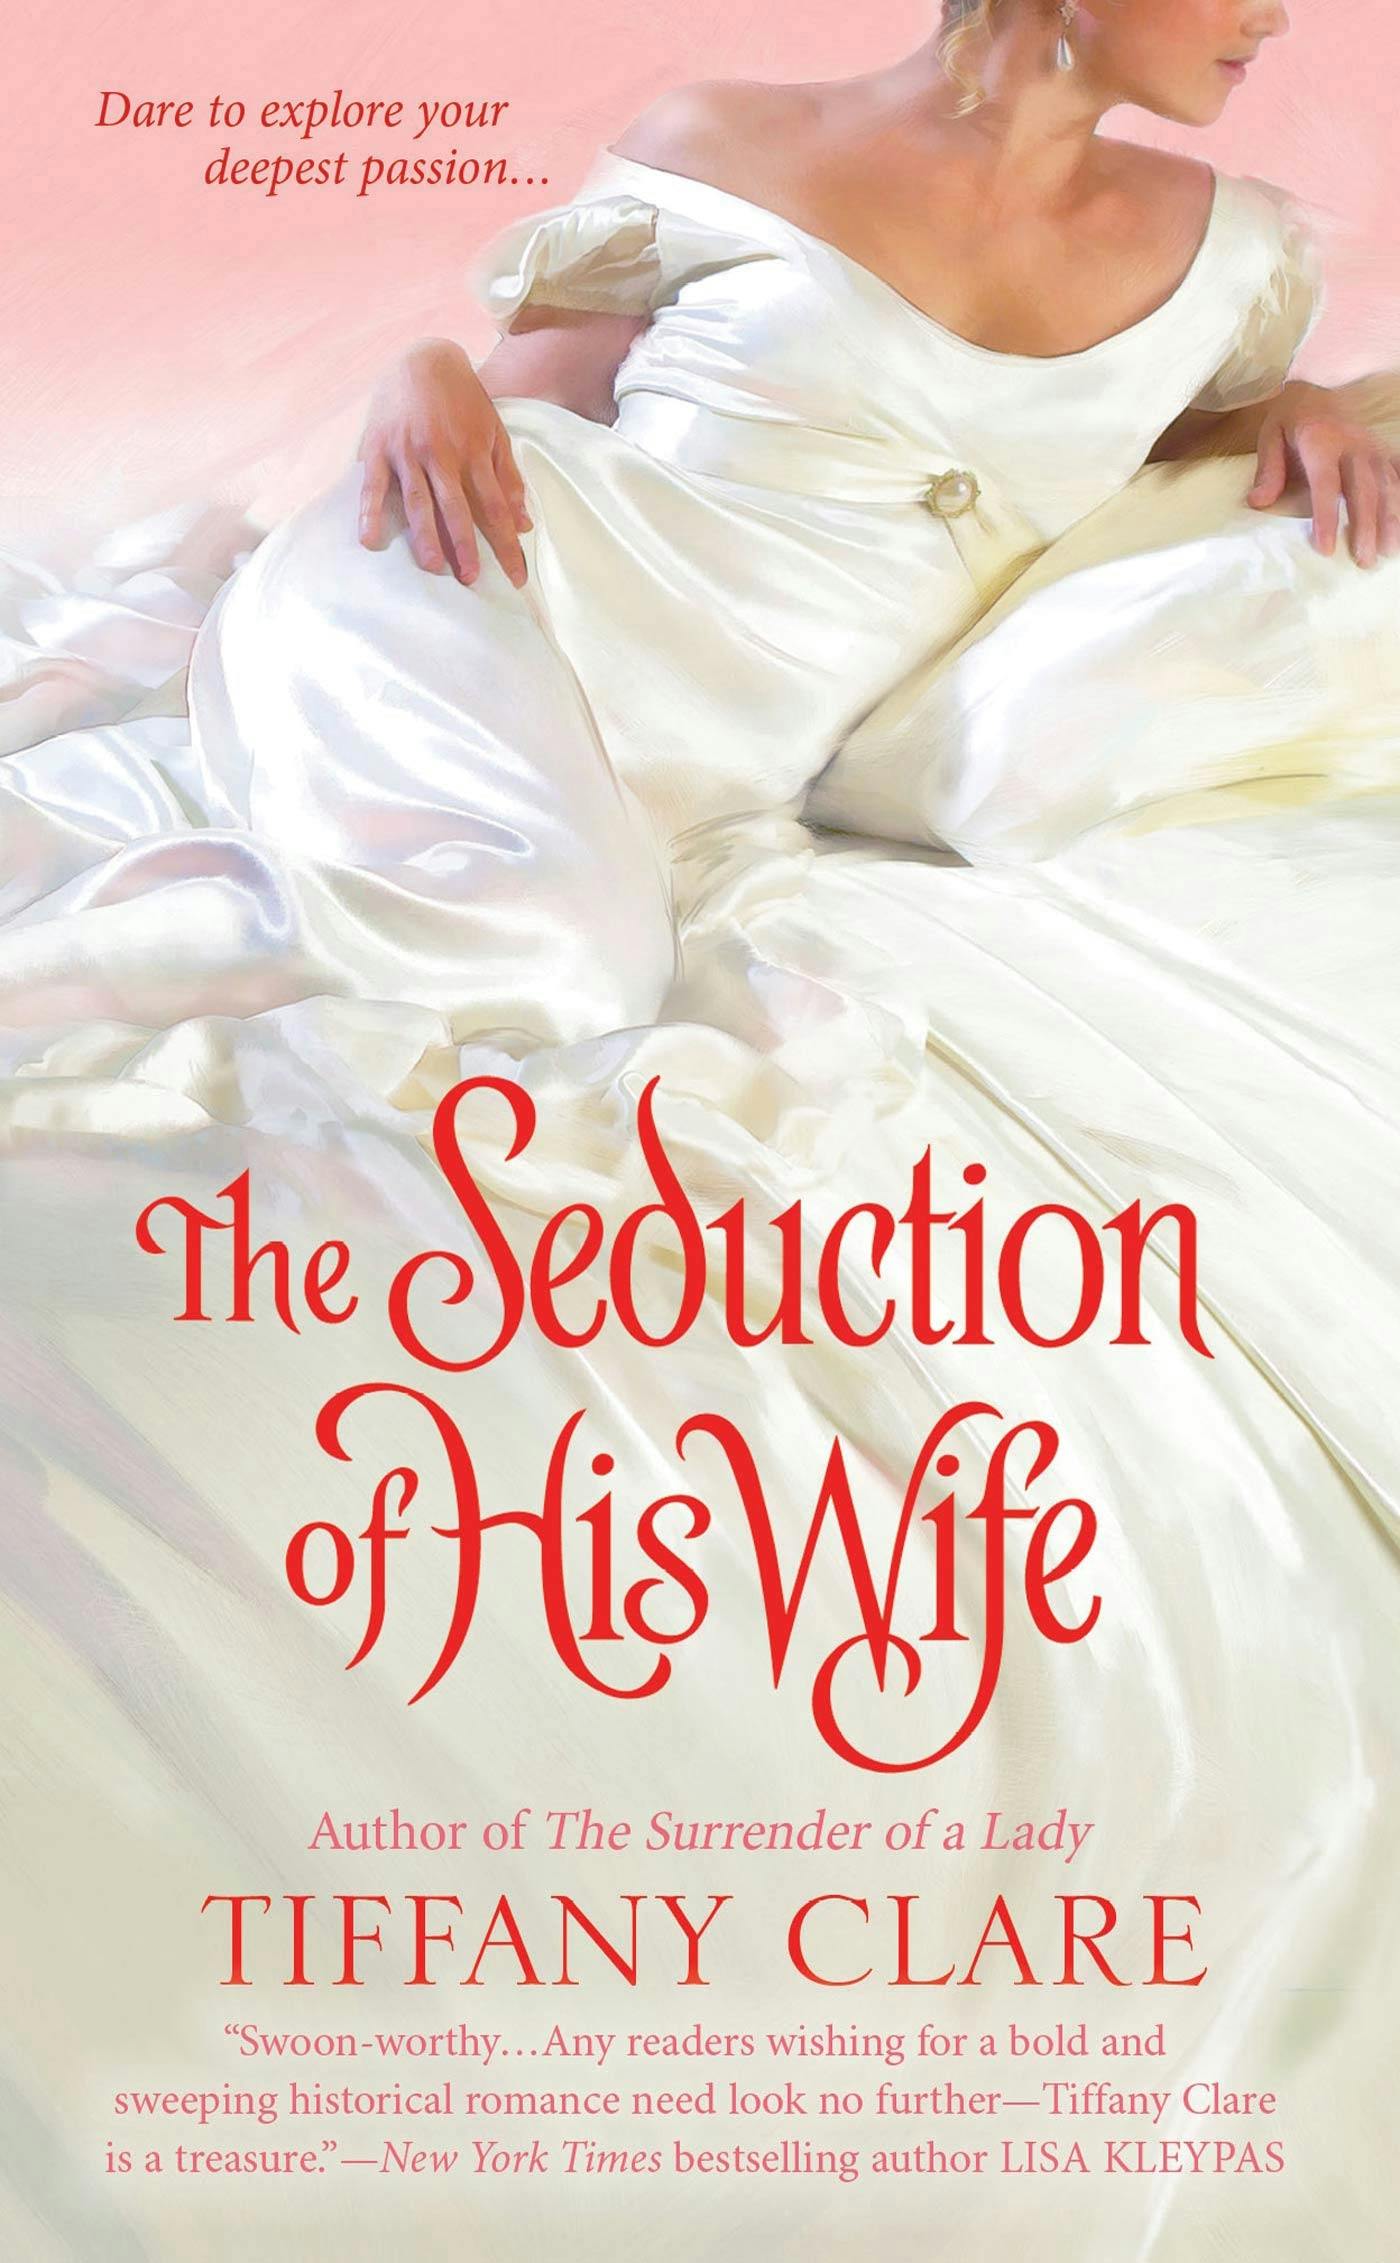 Image of The Seduction of His Wife